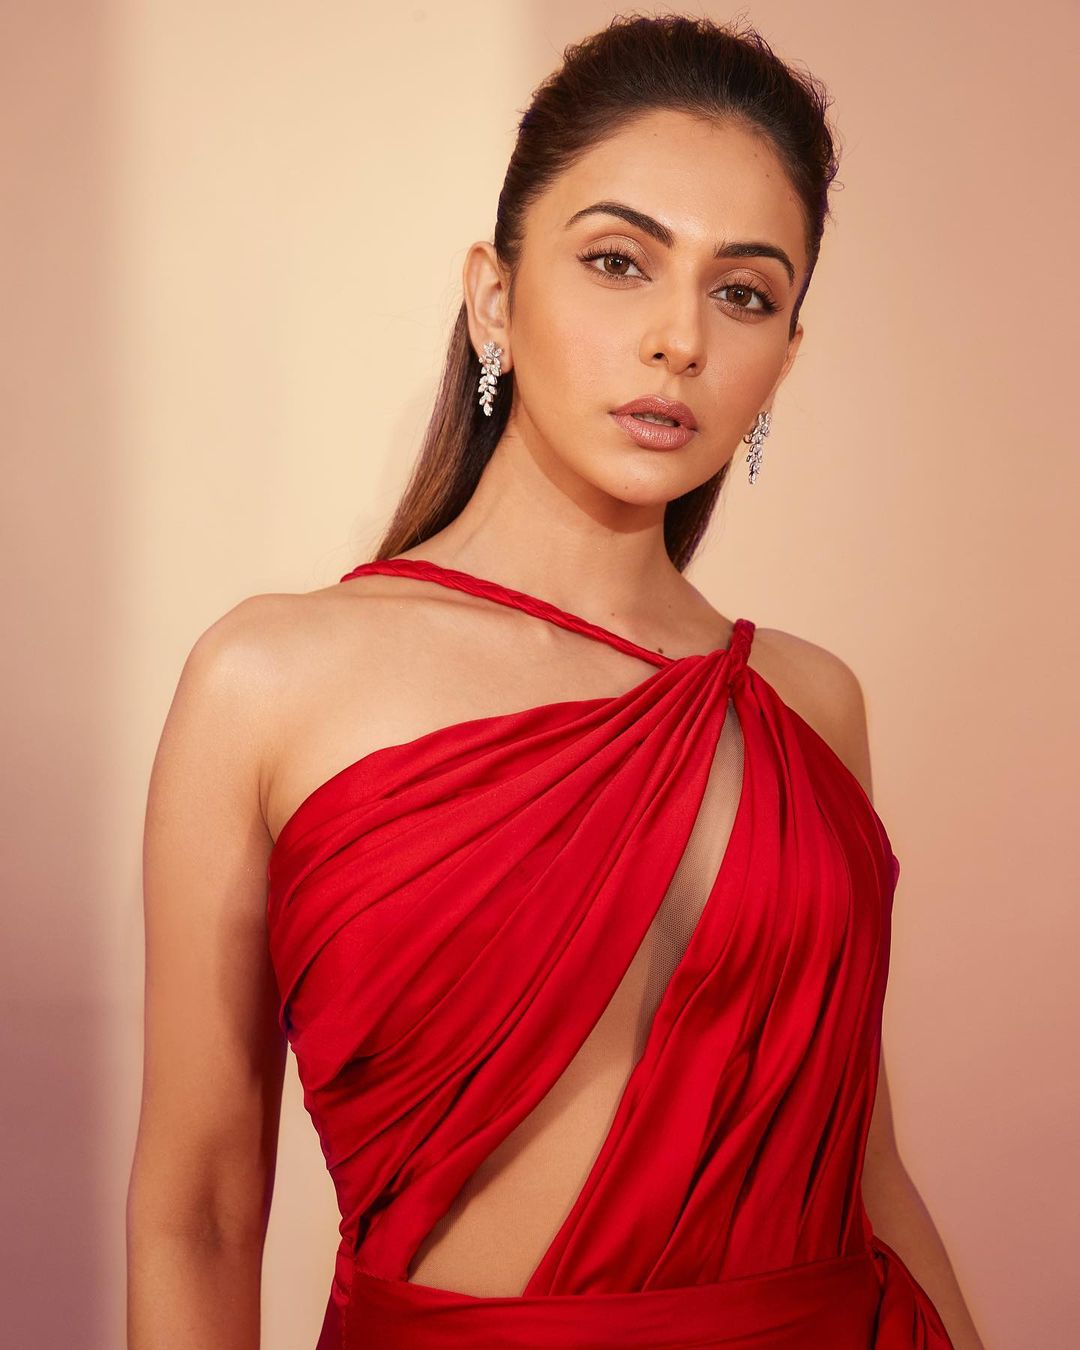 Alluring Poses Of Rakul in Red Outfit